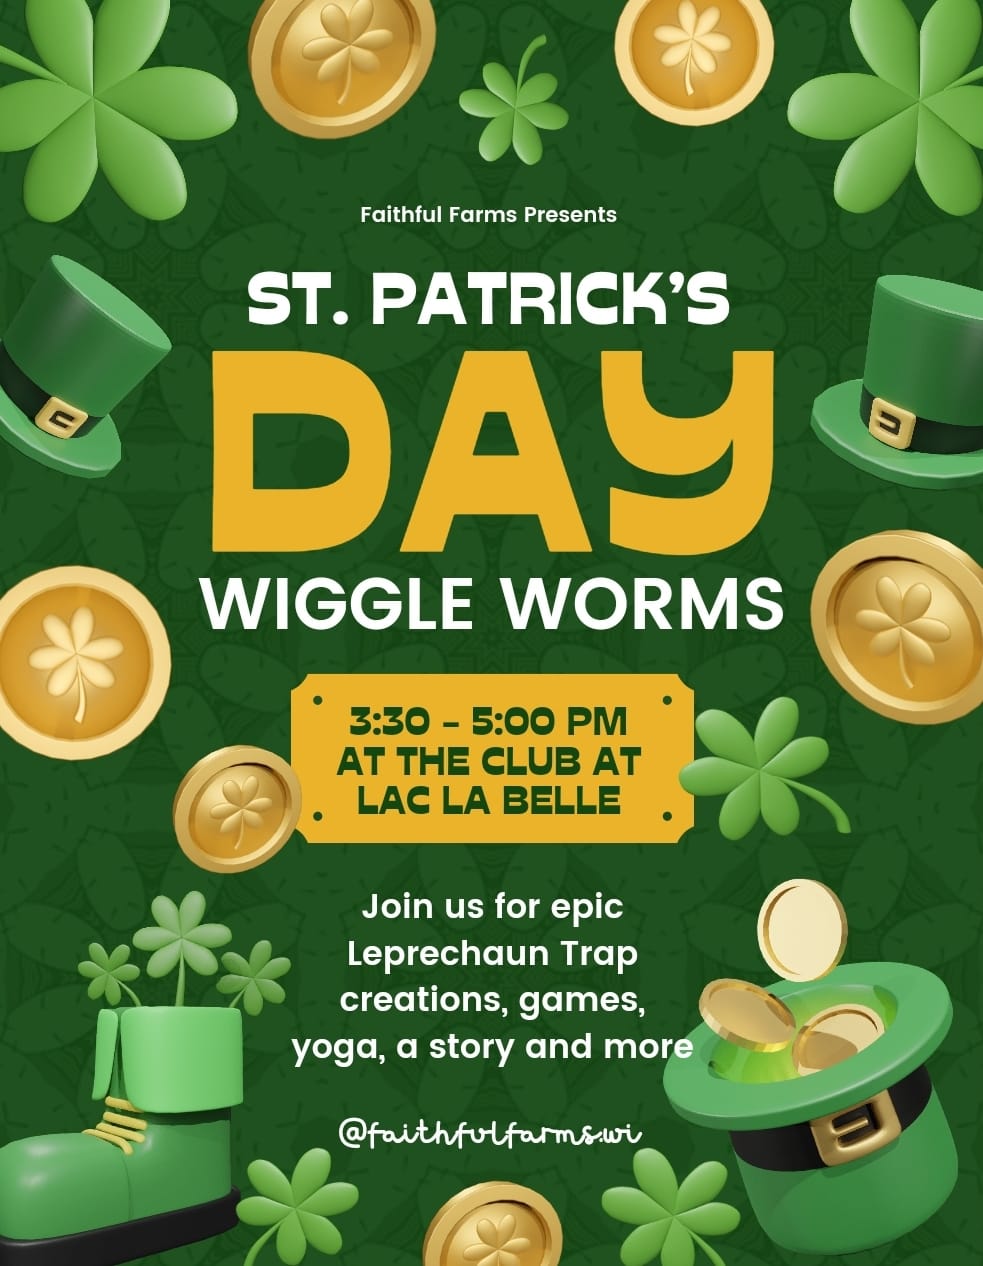 St. Patrick's Day Wiggle Worms